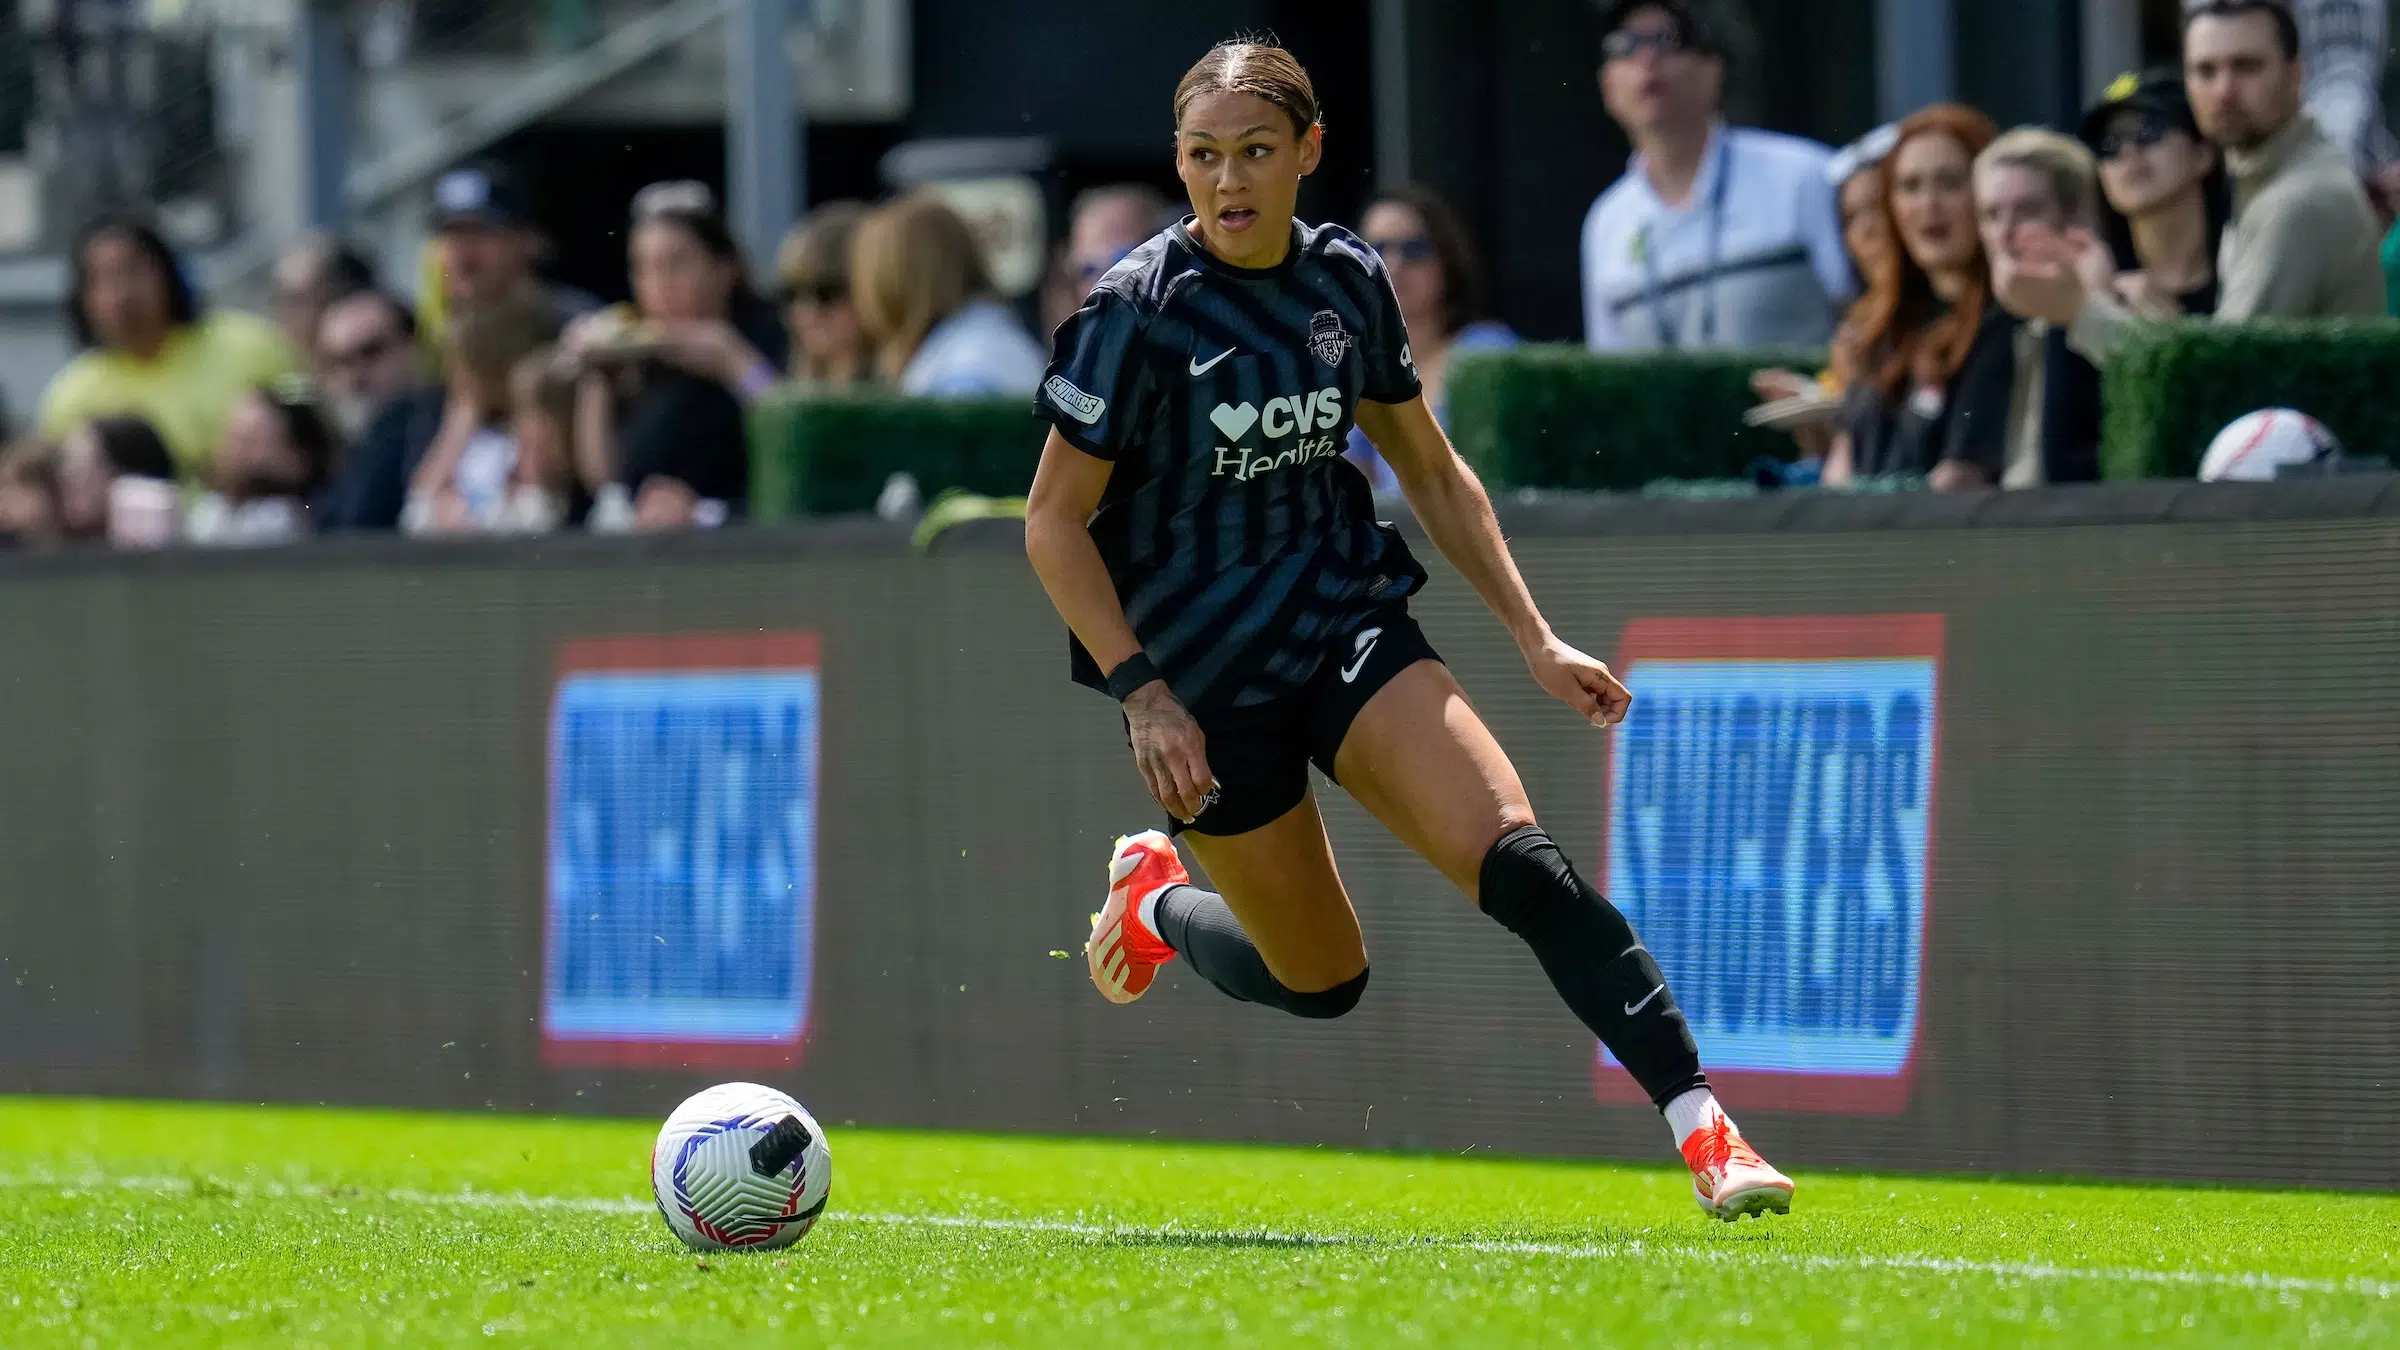 Preview: Spirit to face Orlando Pride in highly anticipated matchup at Audi Field Featured Image